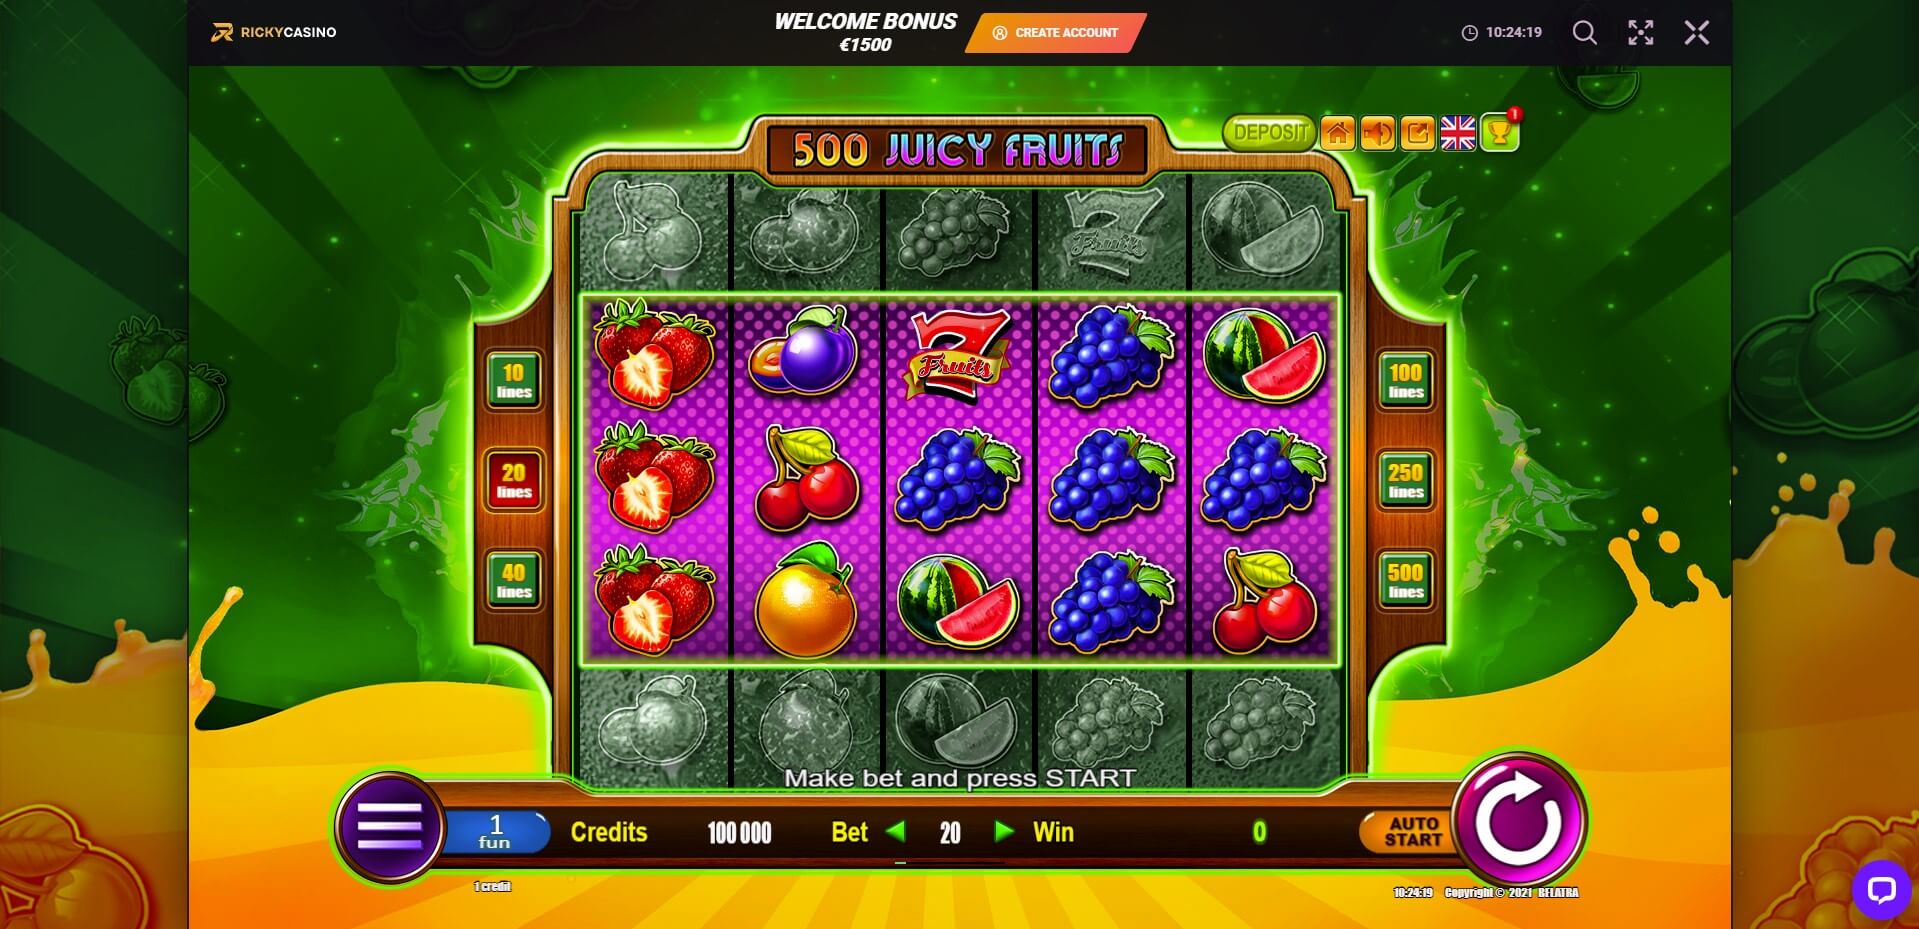 Game PLay at Ricky Casino